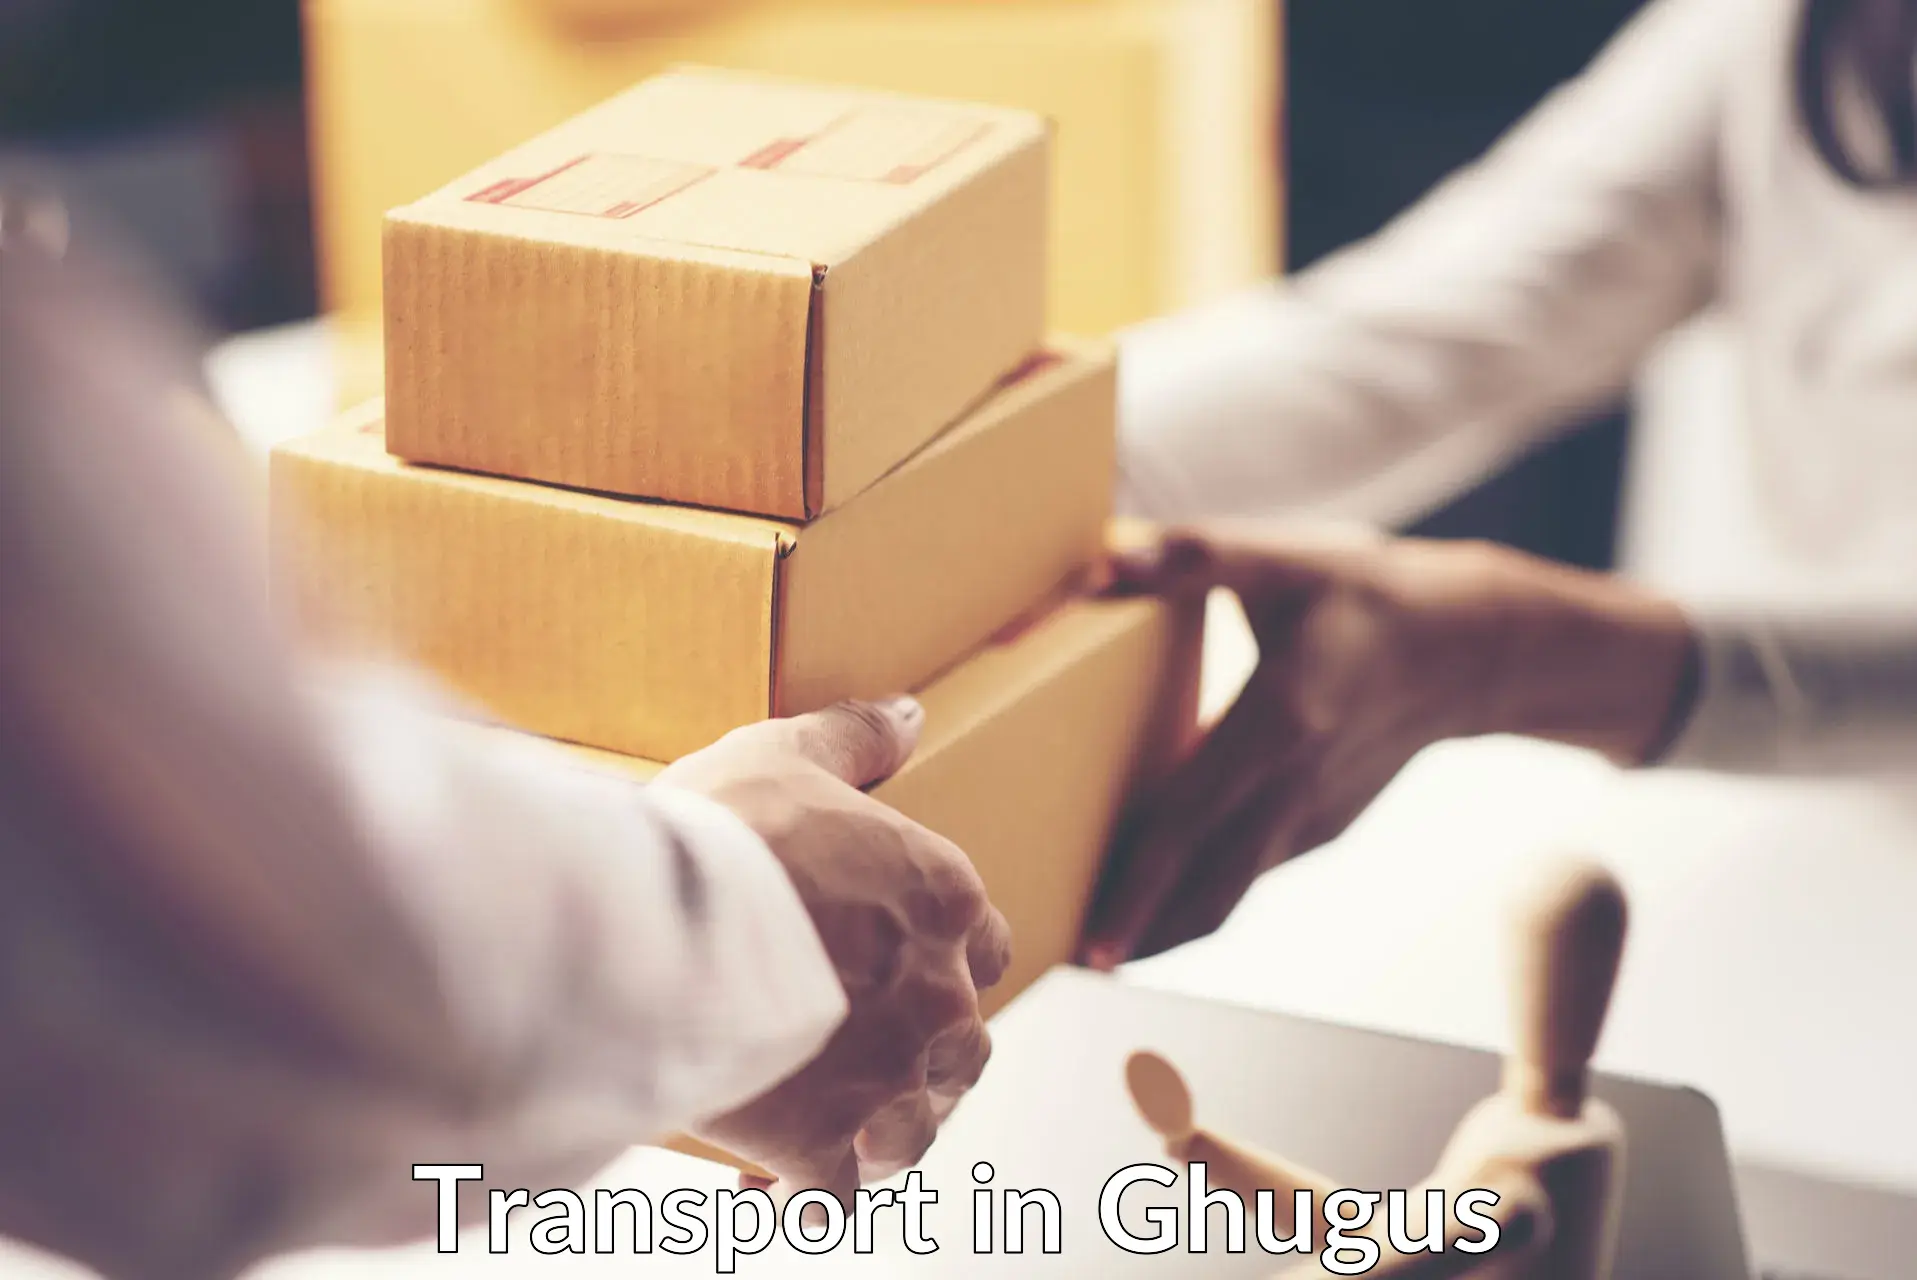 Material transport services in Ghugus